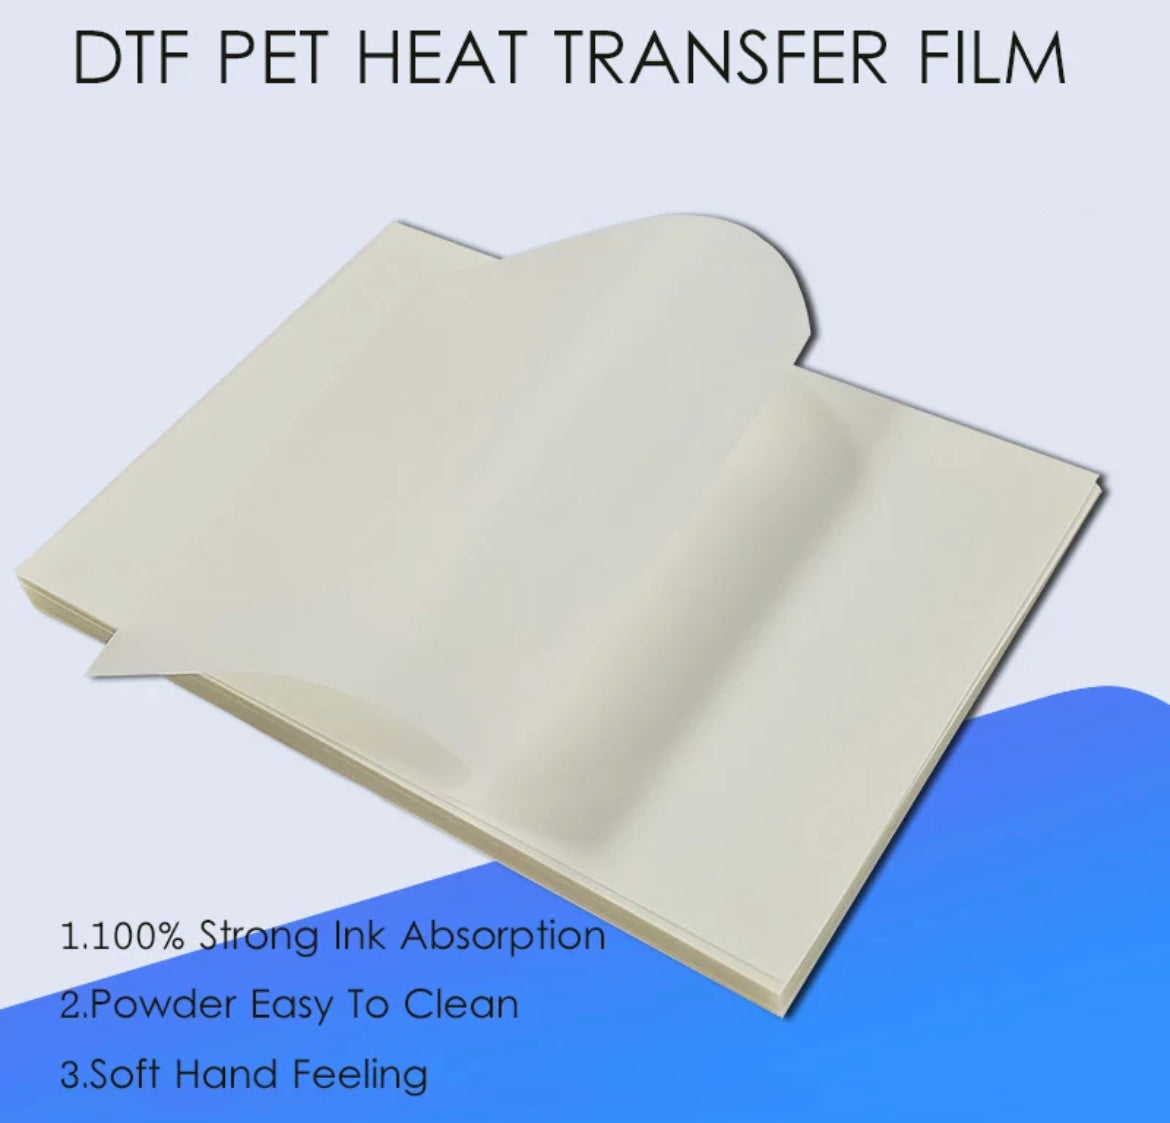 Best DTF PET Film 13x19 A3 100 Sheets for Dtf Printing Double Sided 